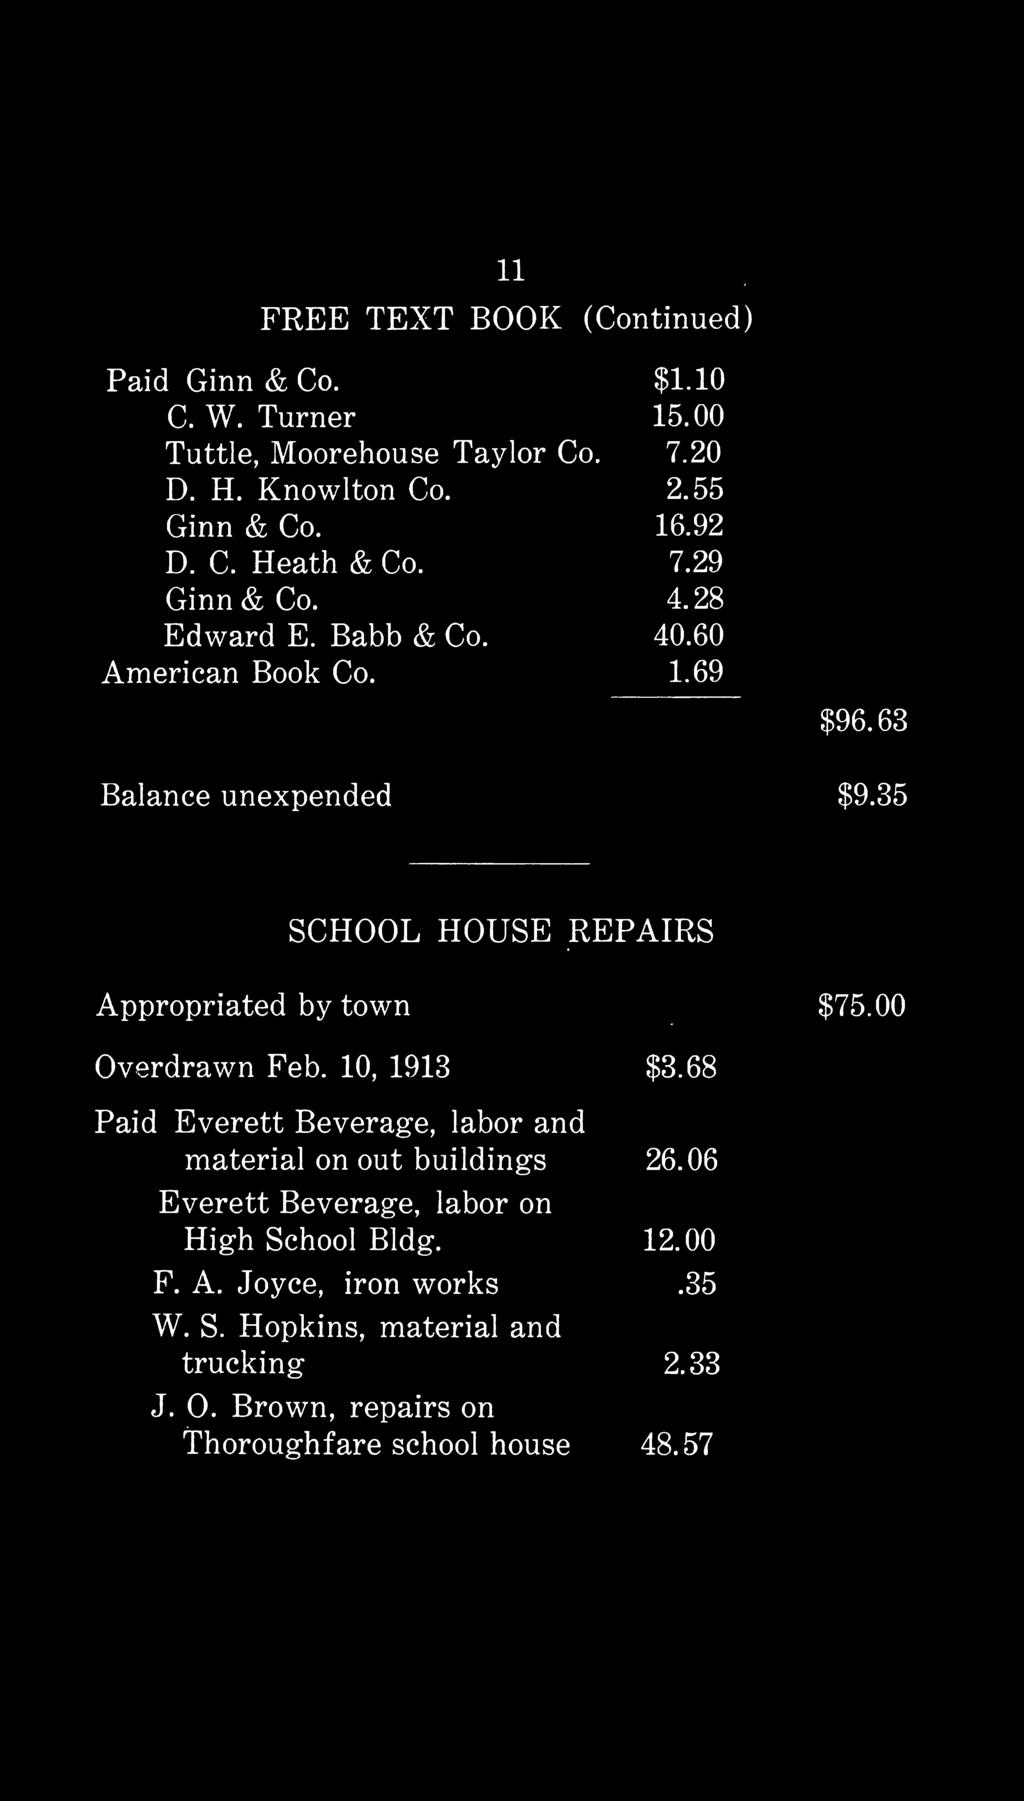 35 SCHOOL HOUSE REPAIRS > Appropriated by town $75.00. - m Overdrawn Feb. 10, 1913 $3.